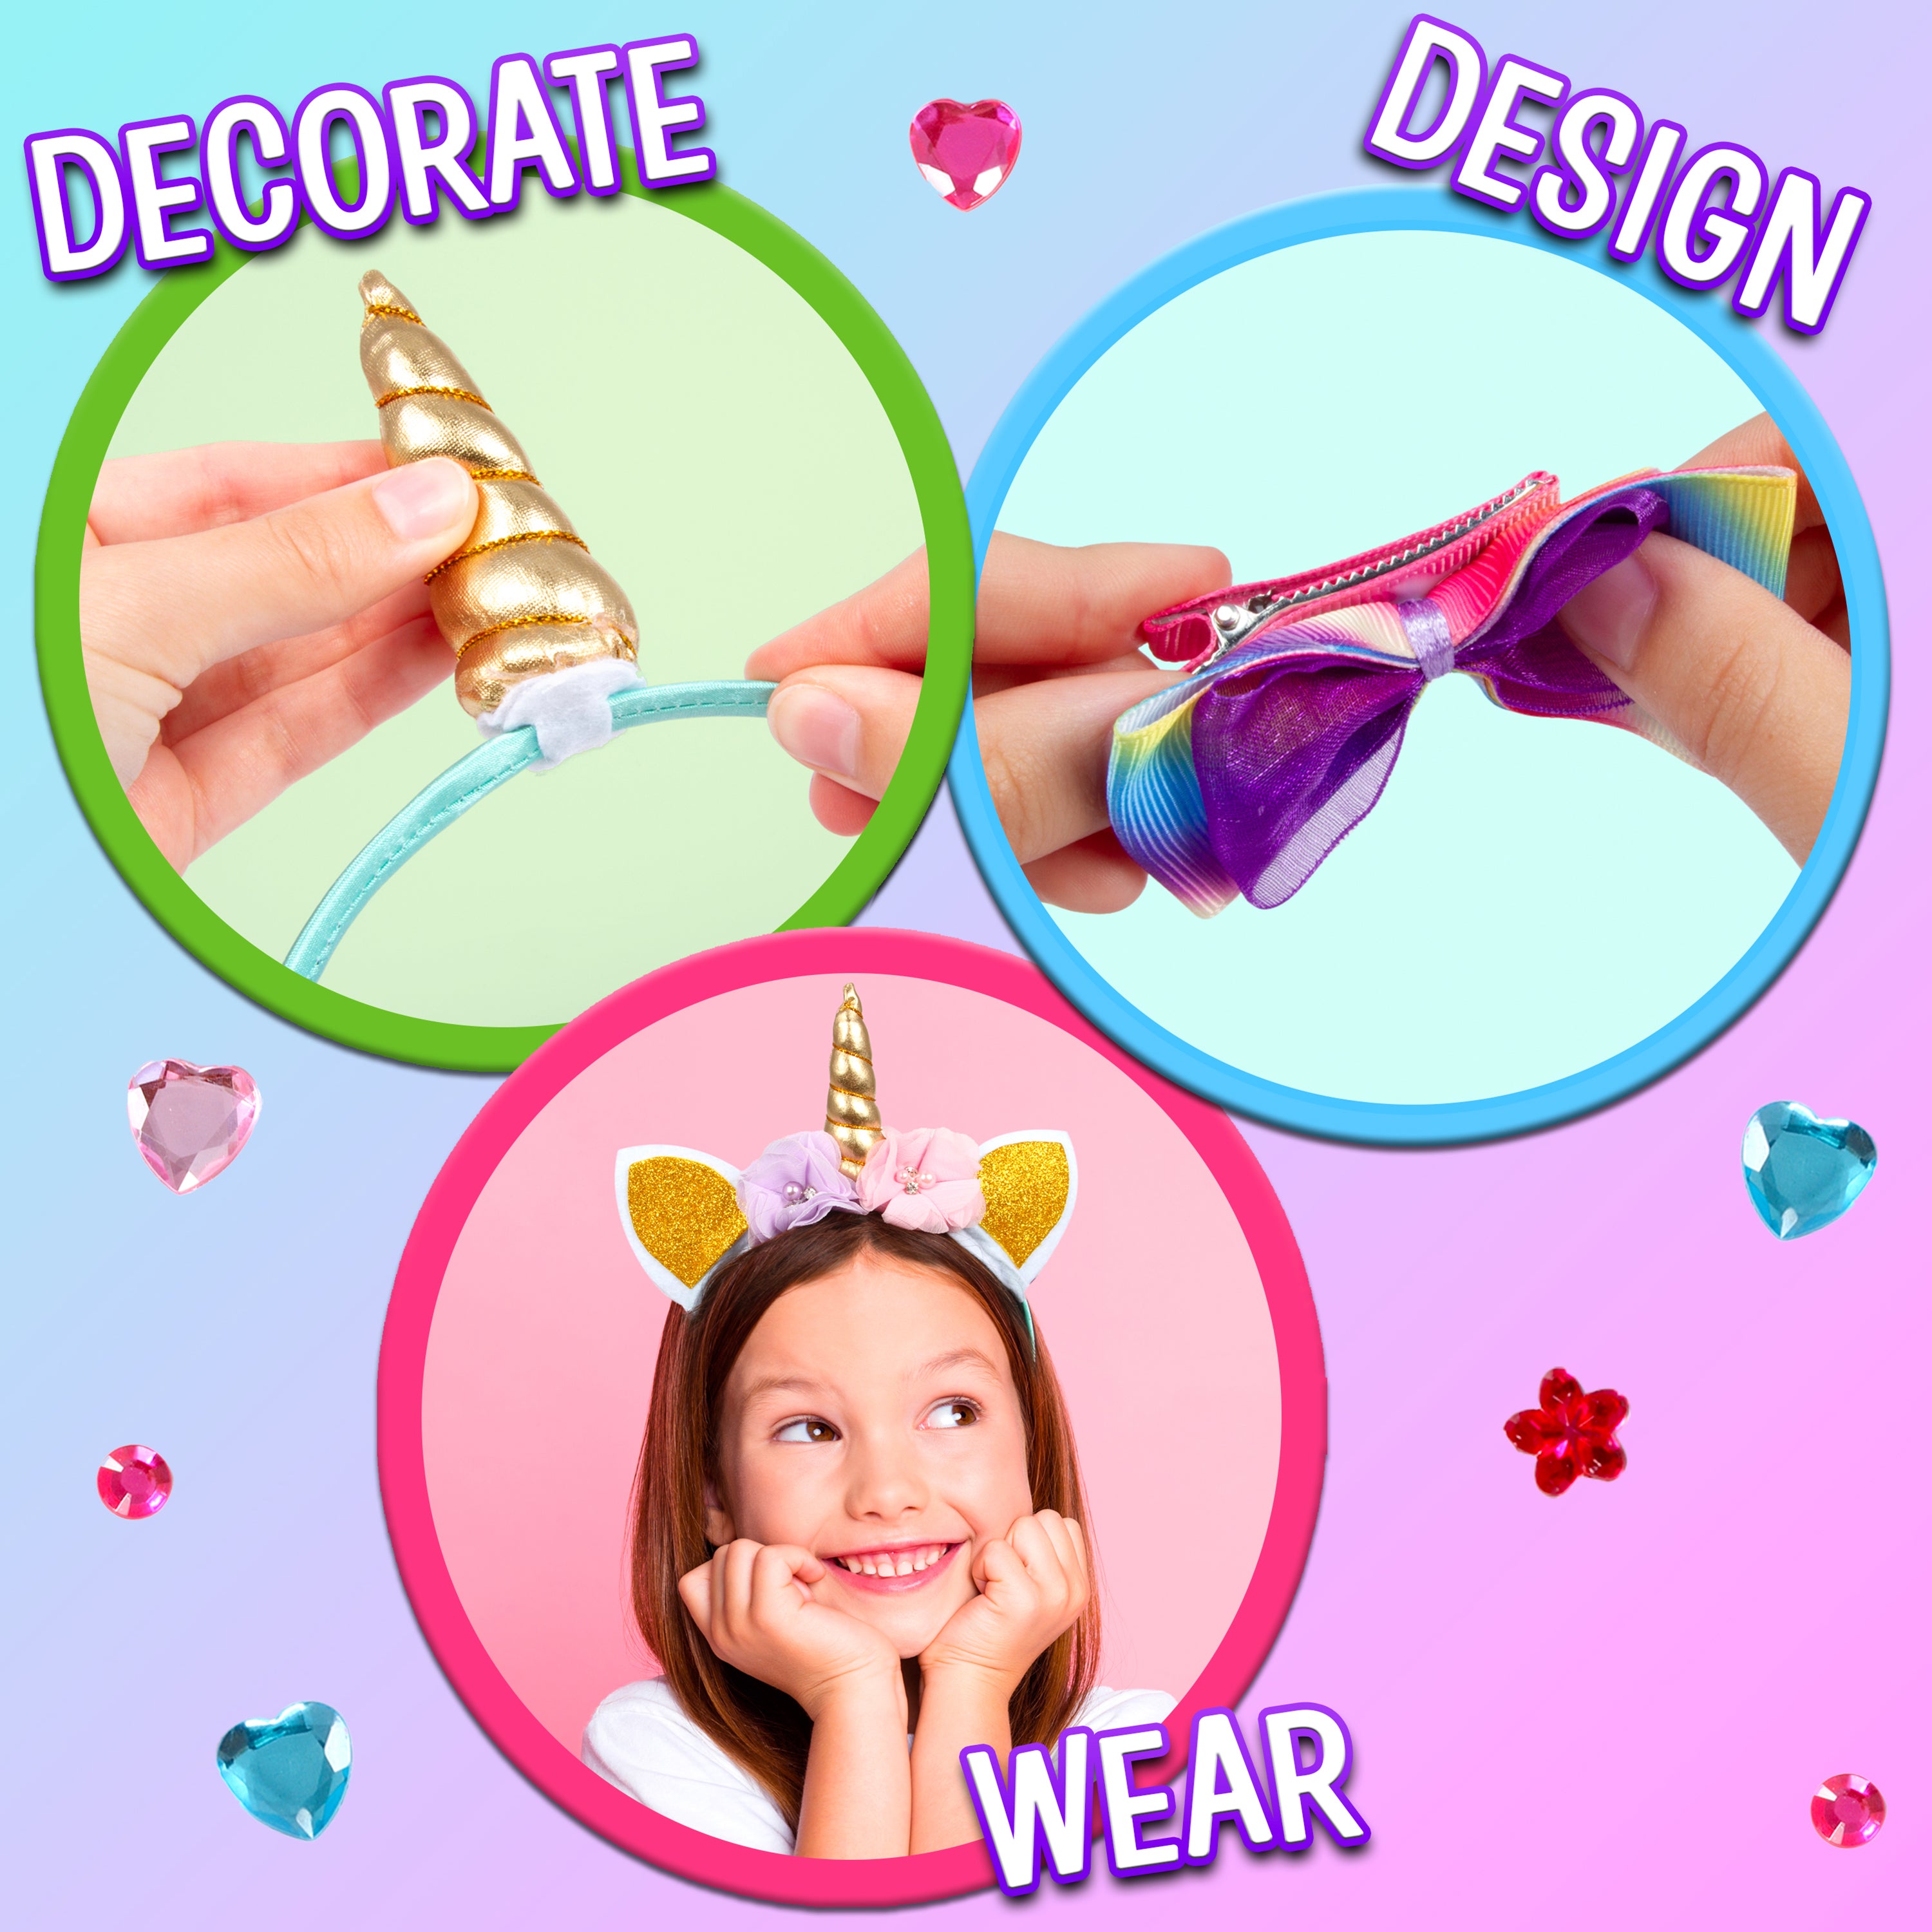 Headband Making Kit for Girls - Make Your Own Fashion Headbands for Kids -  DIY Hair Accessories Set - Arts & Crafts Gift for Ages 5-12 Year Old Girl 